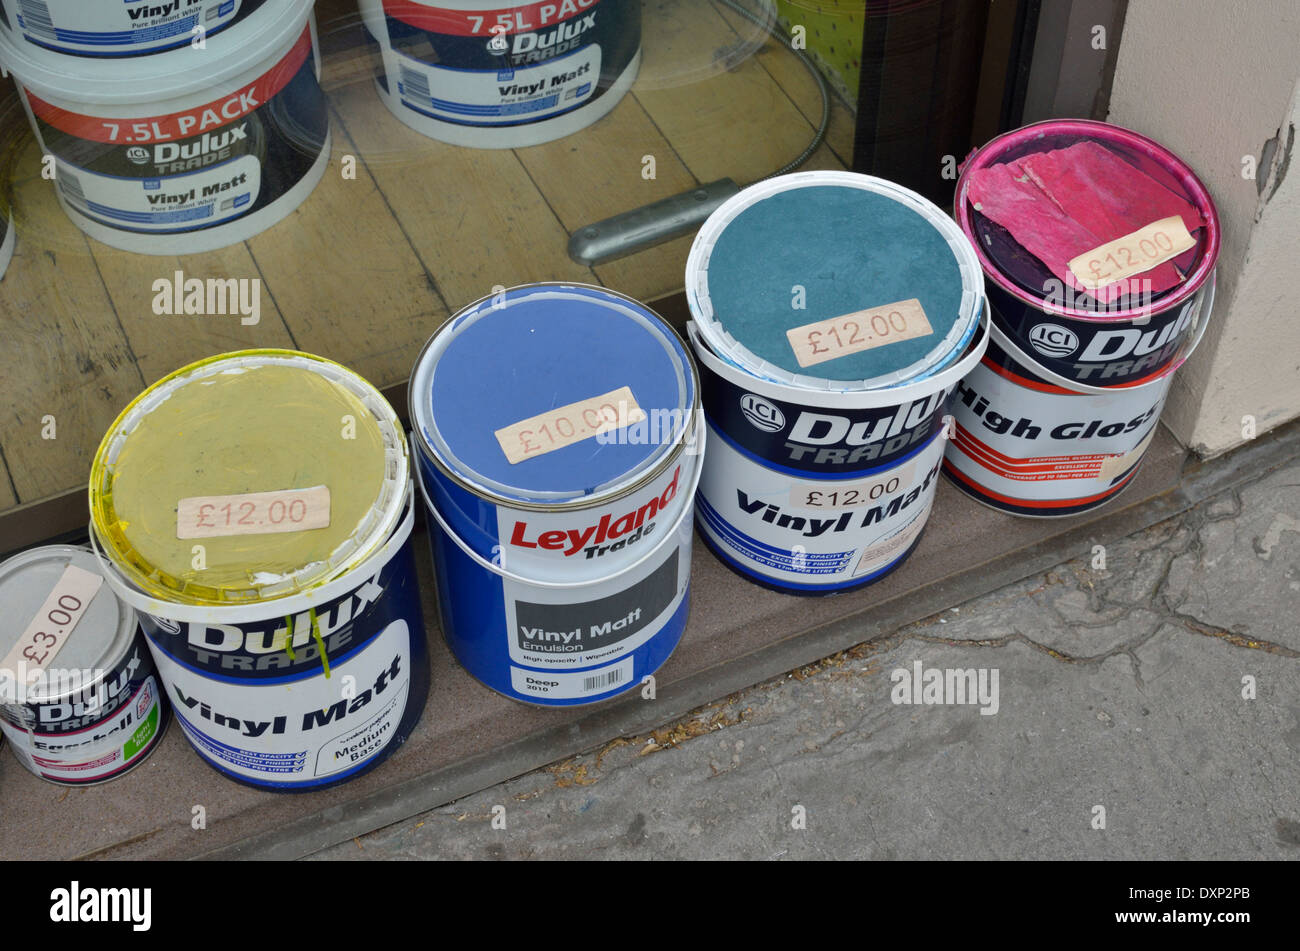 Second hand paint tins on display outside a shop, London, UK Stock Photo